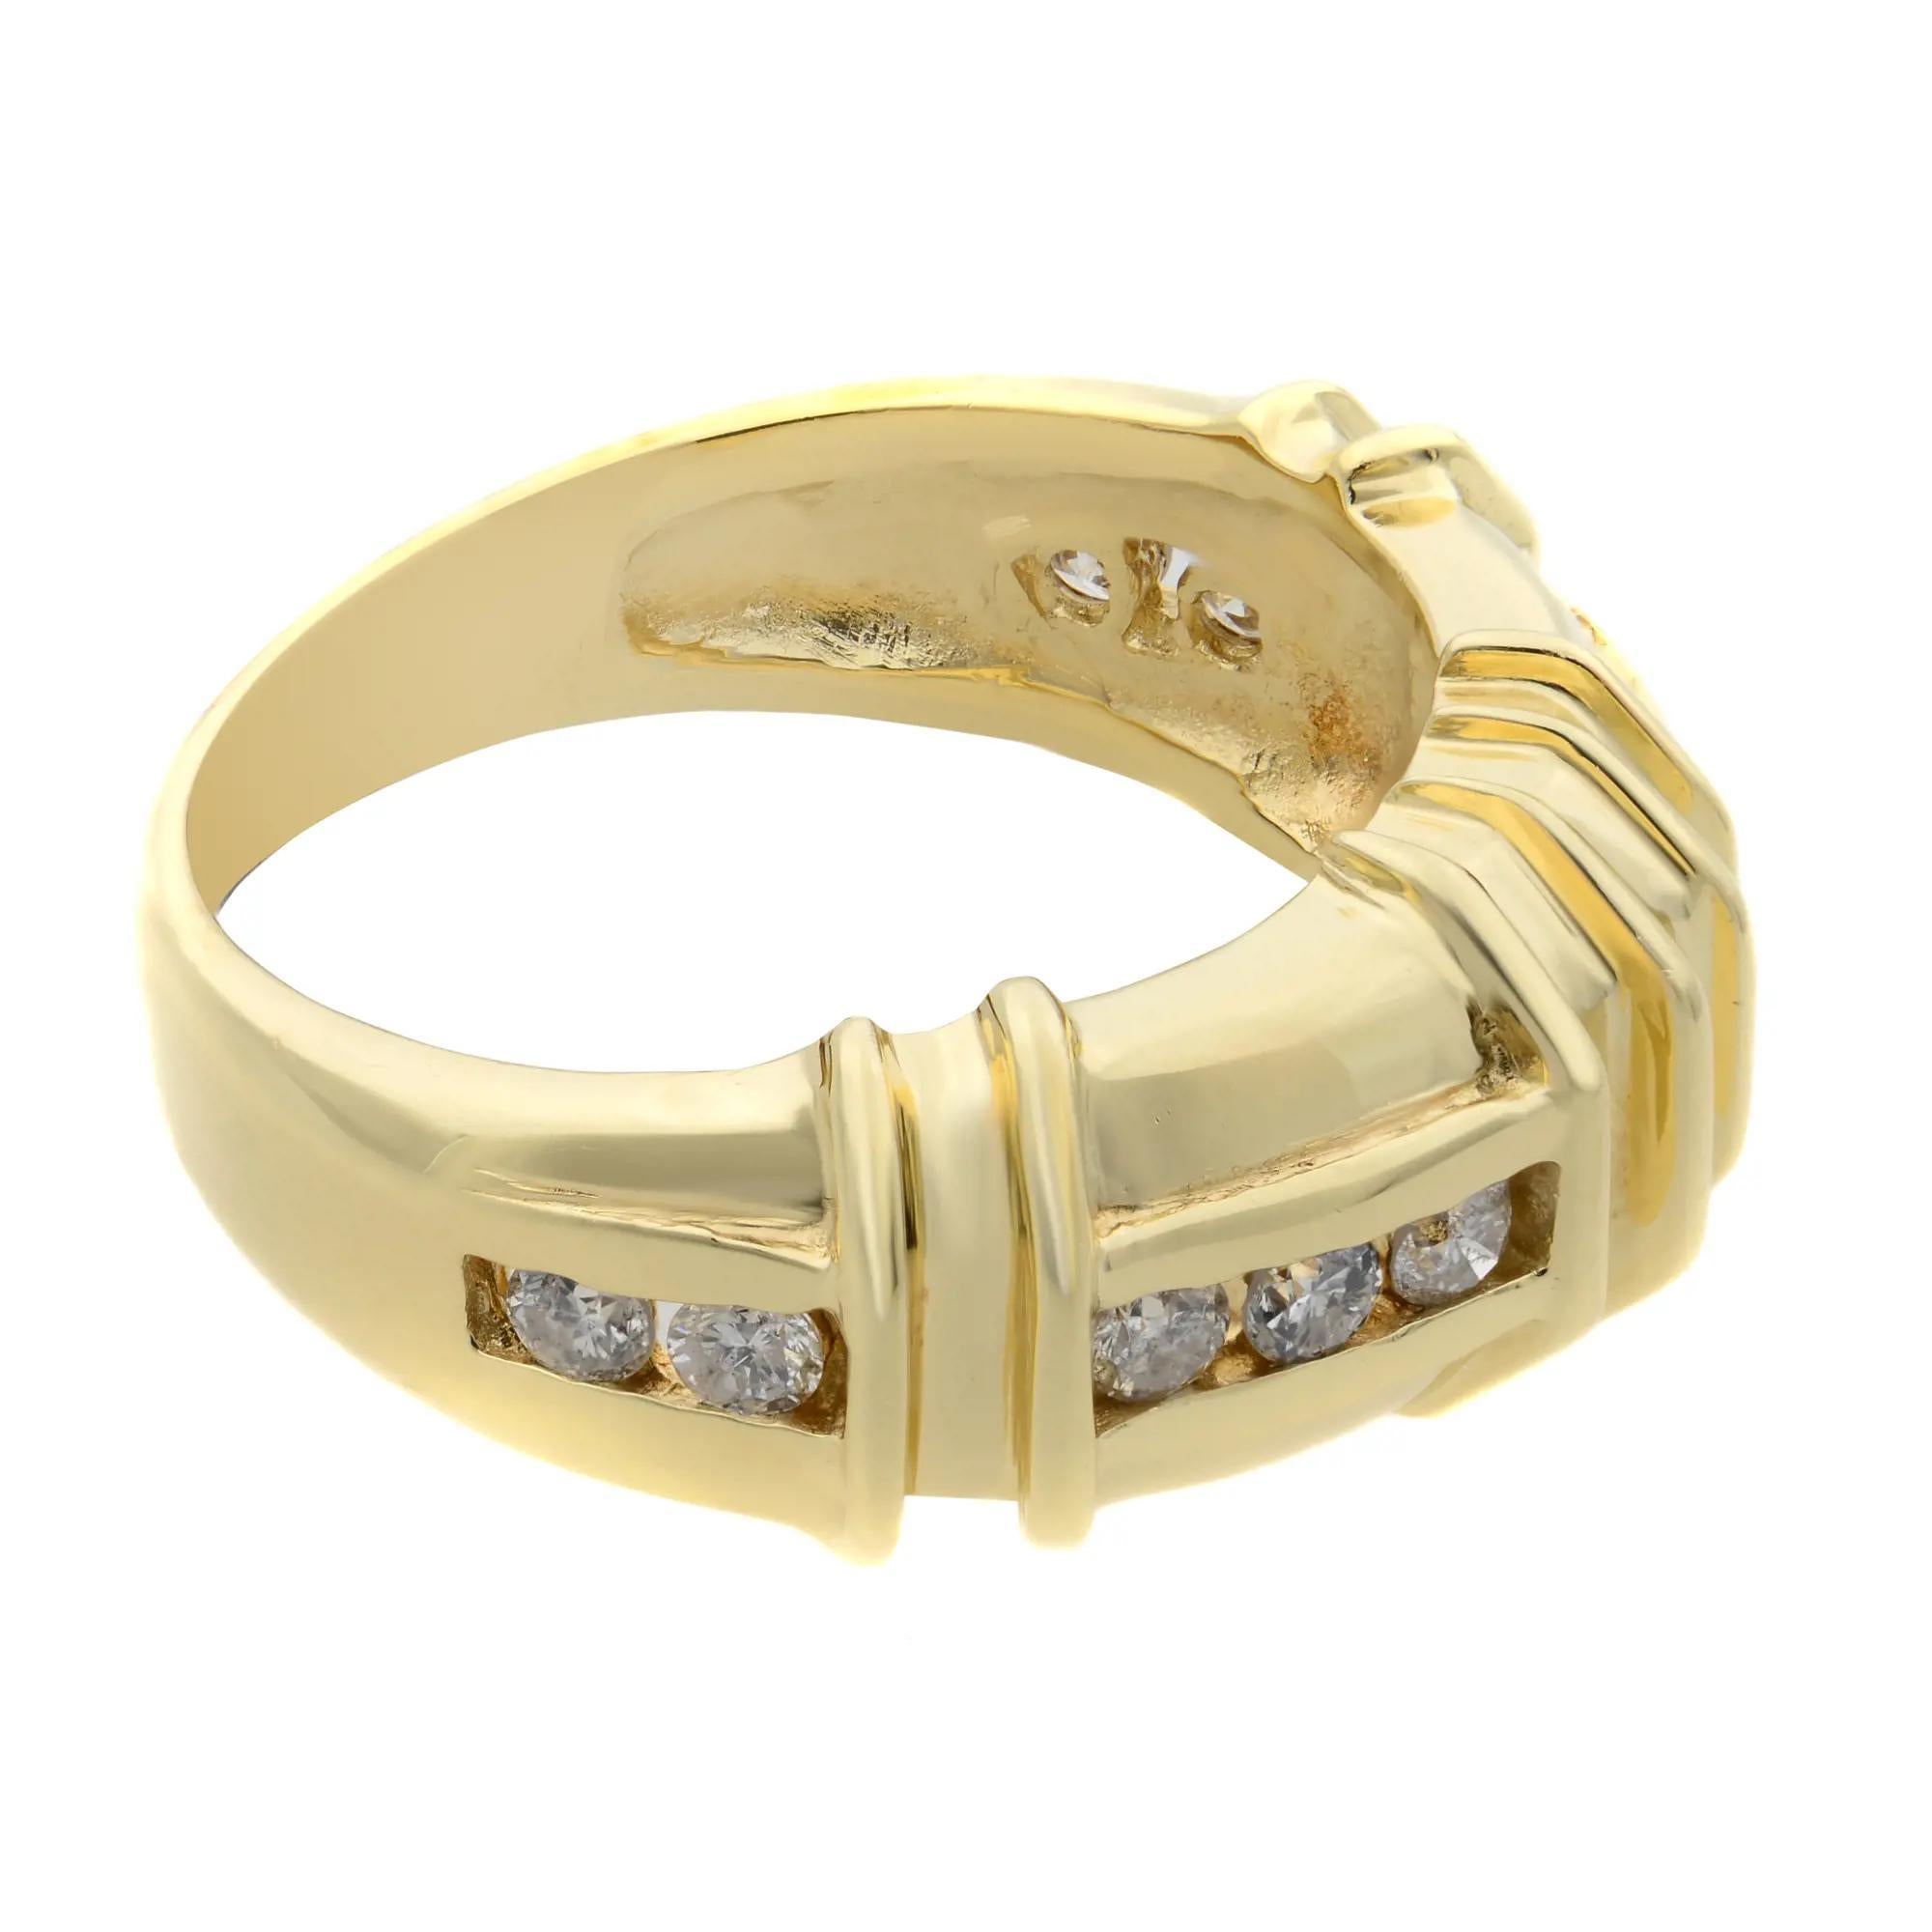 Rachel Koen 0.50Cttw Round Cut Diamond Ladies Ring 14K Yellow Gold In Excellent Condition For Sale In New York, NY